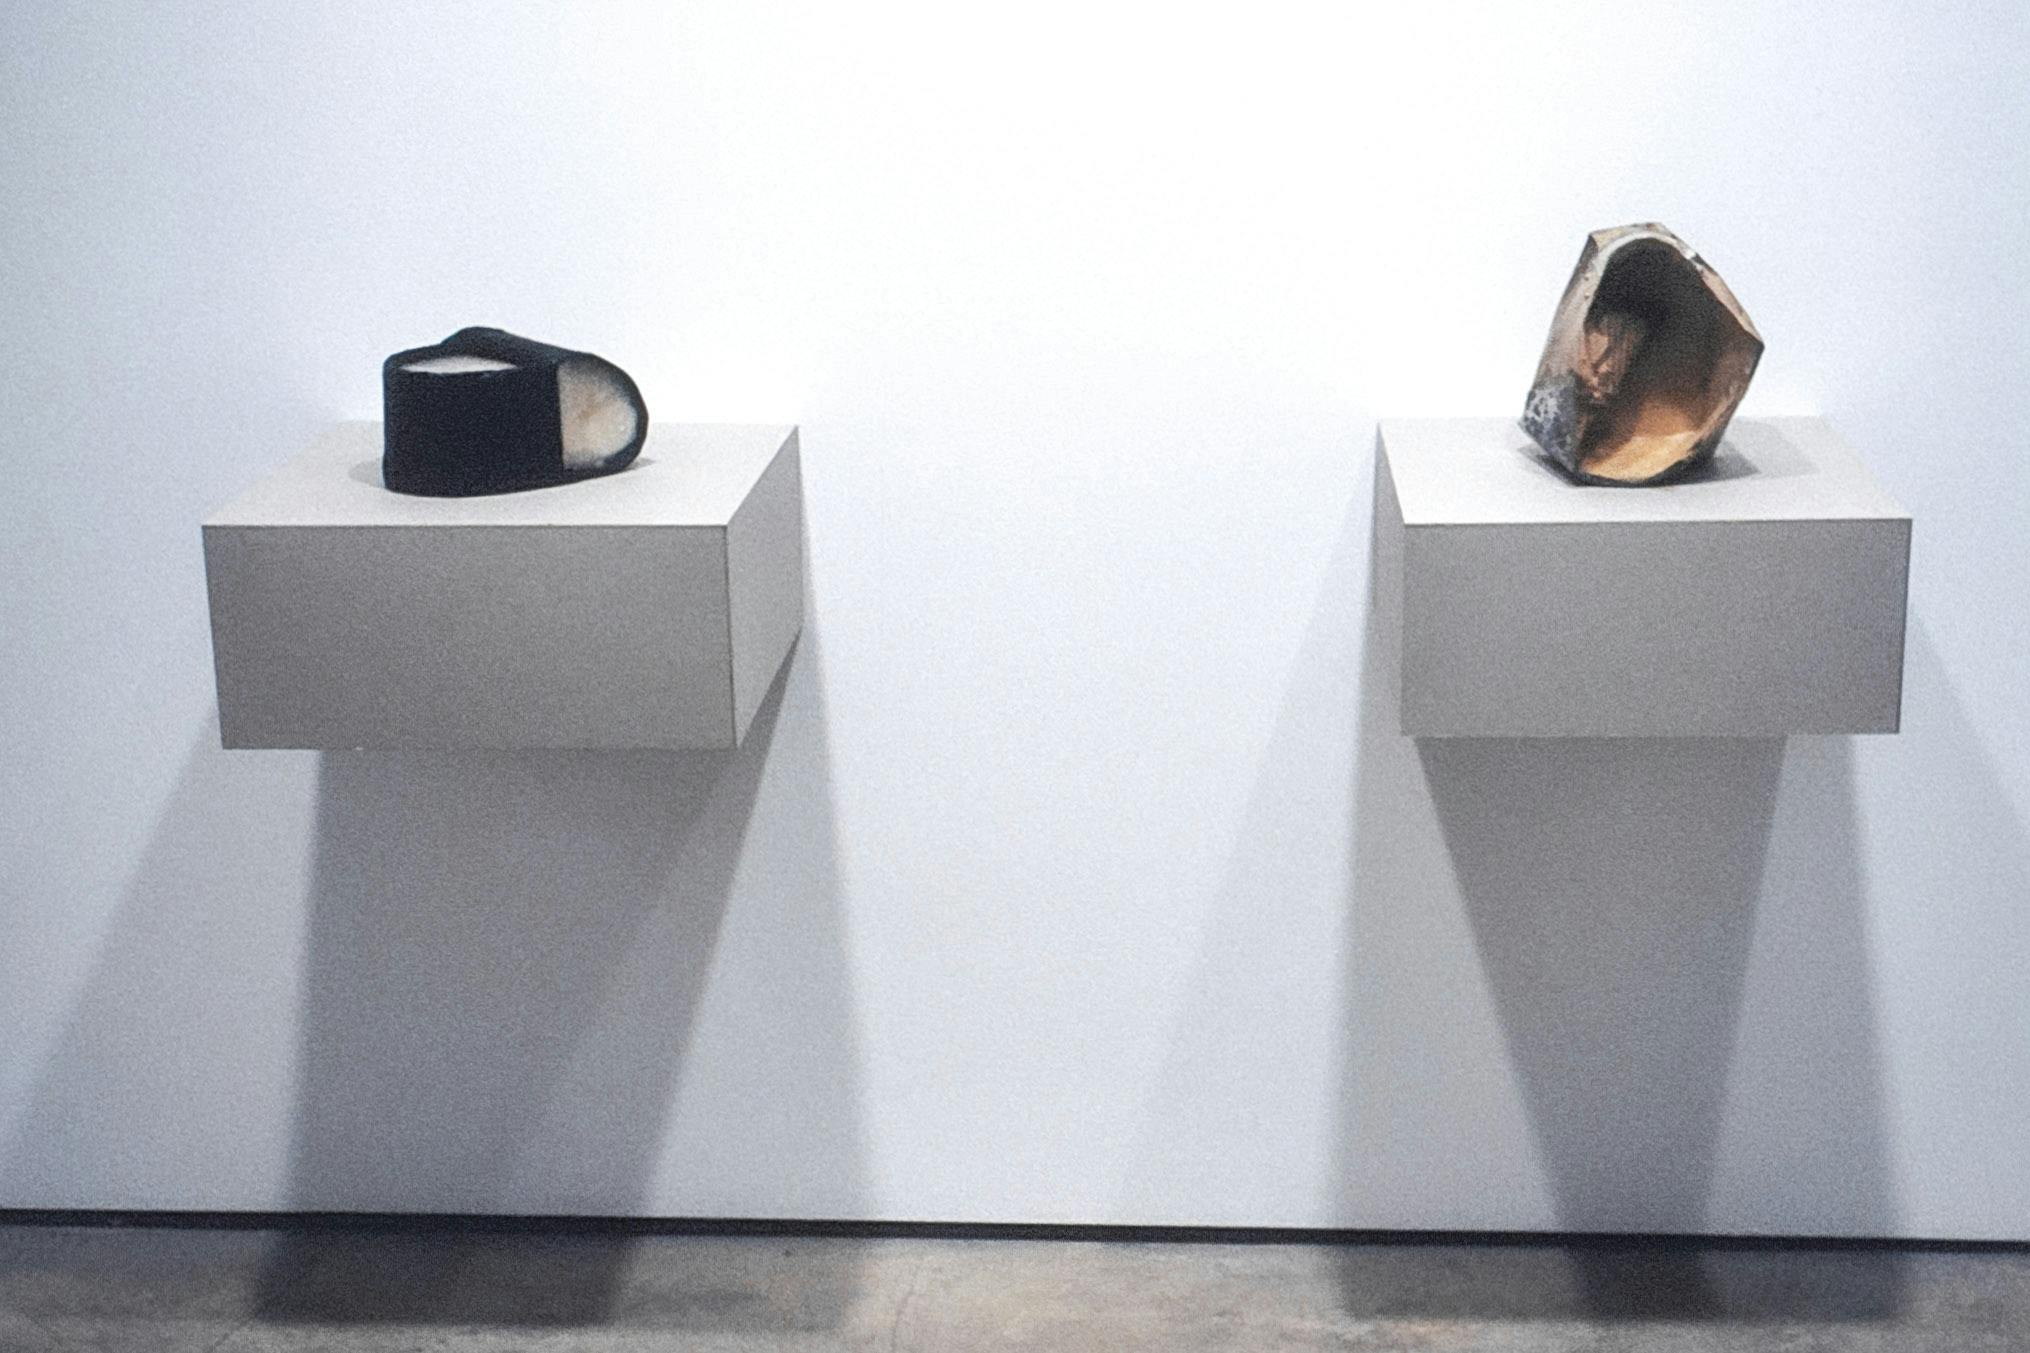 2 artworks on small grey plinths mounted on white walls. On the left is a black vessel with white on its "handle" and white filling inside. The other is a carved piece of wood with a concave interior.